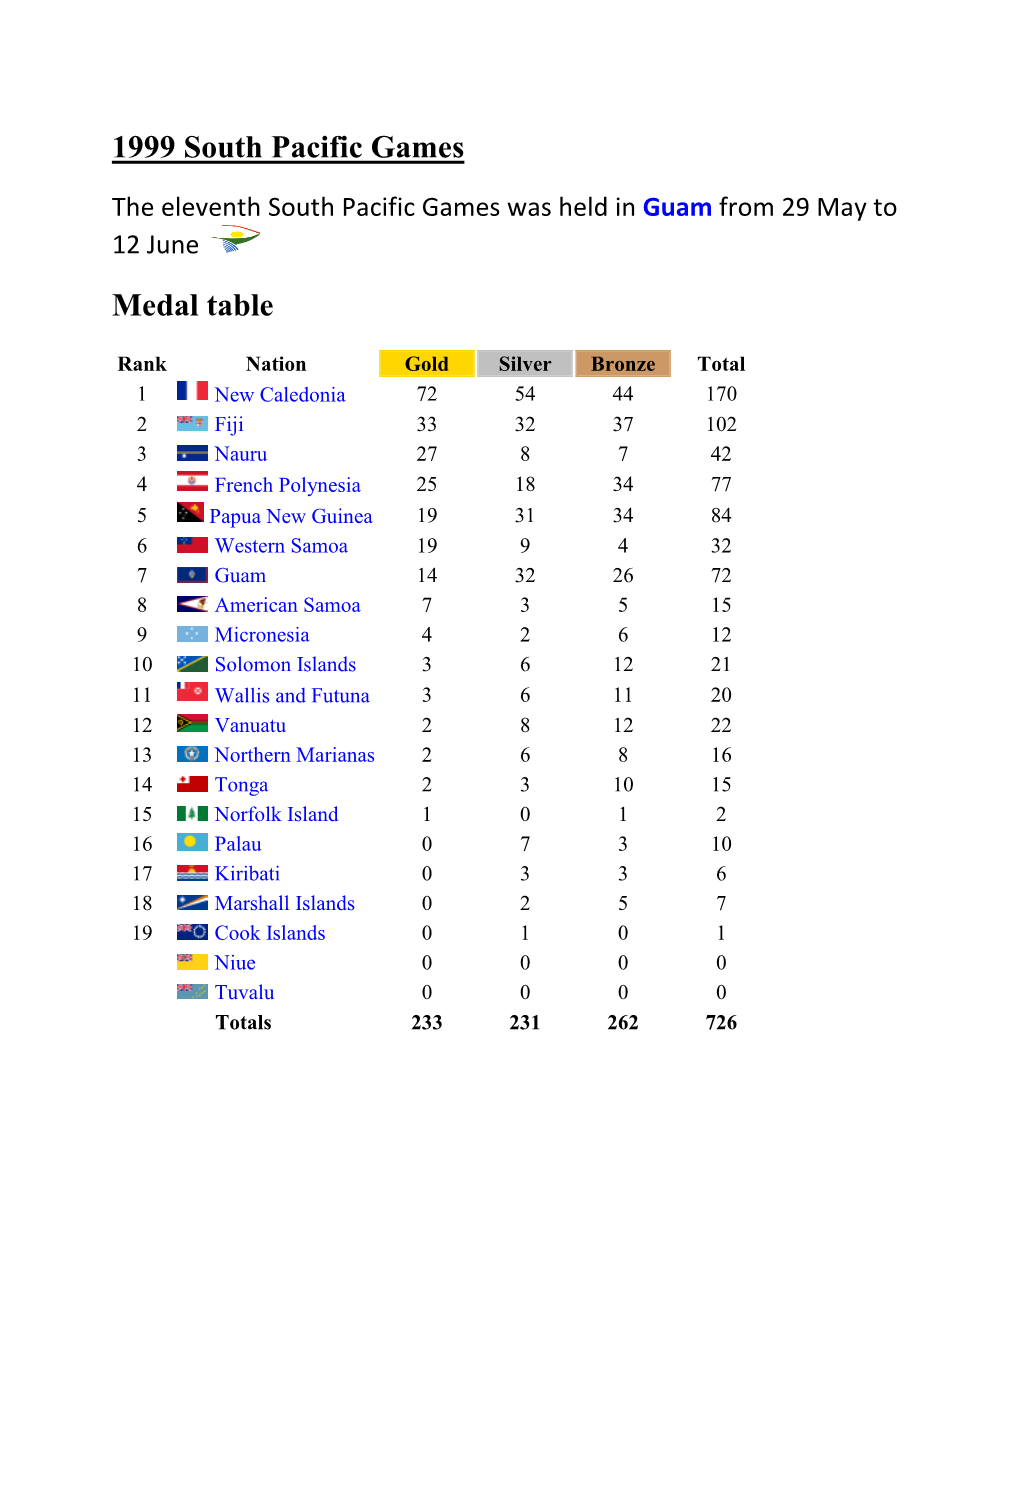 1999 South Pacific Games Medal Table